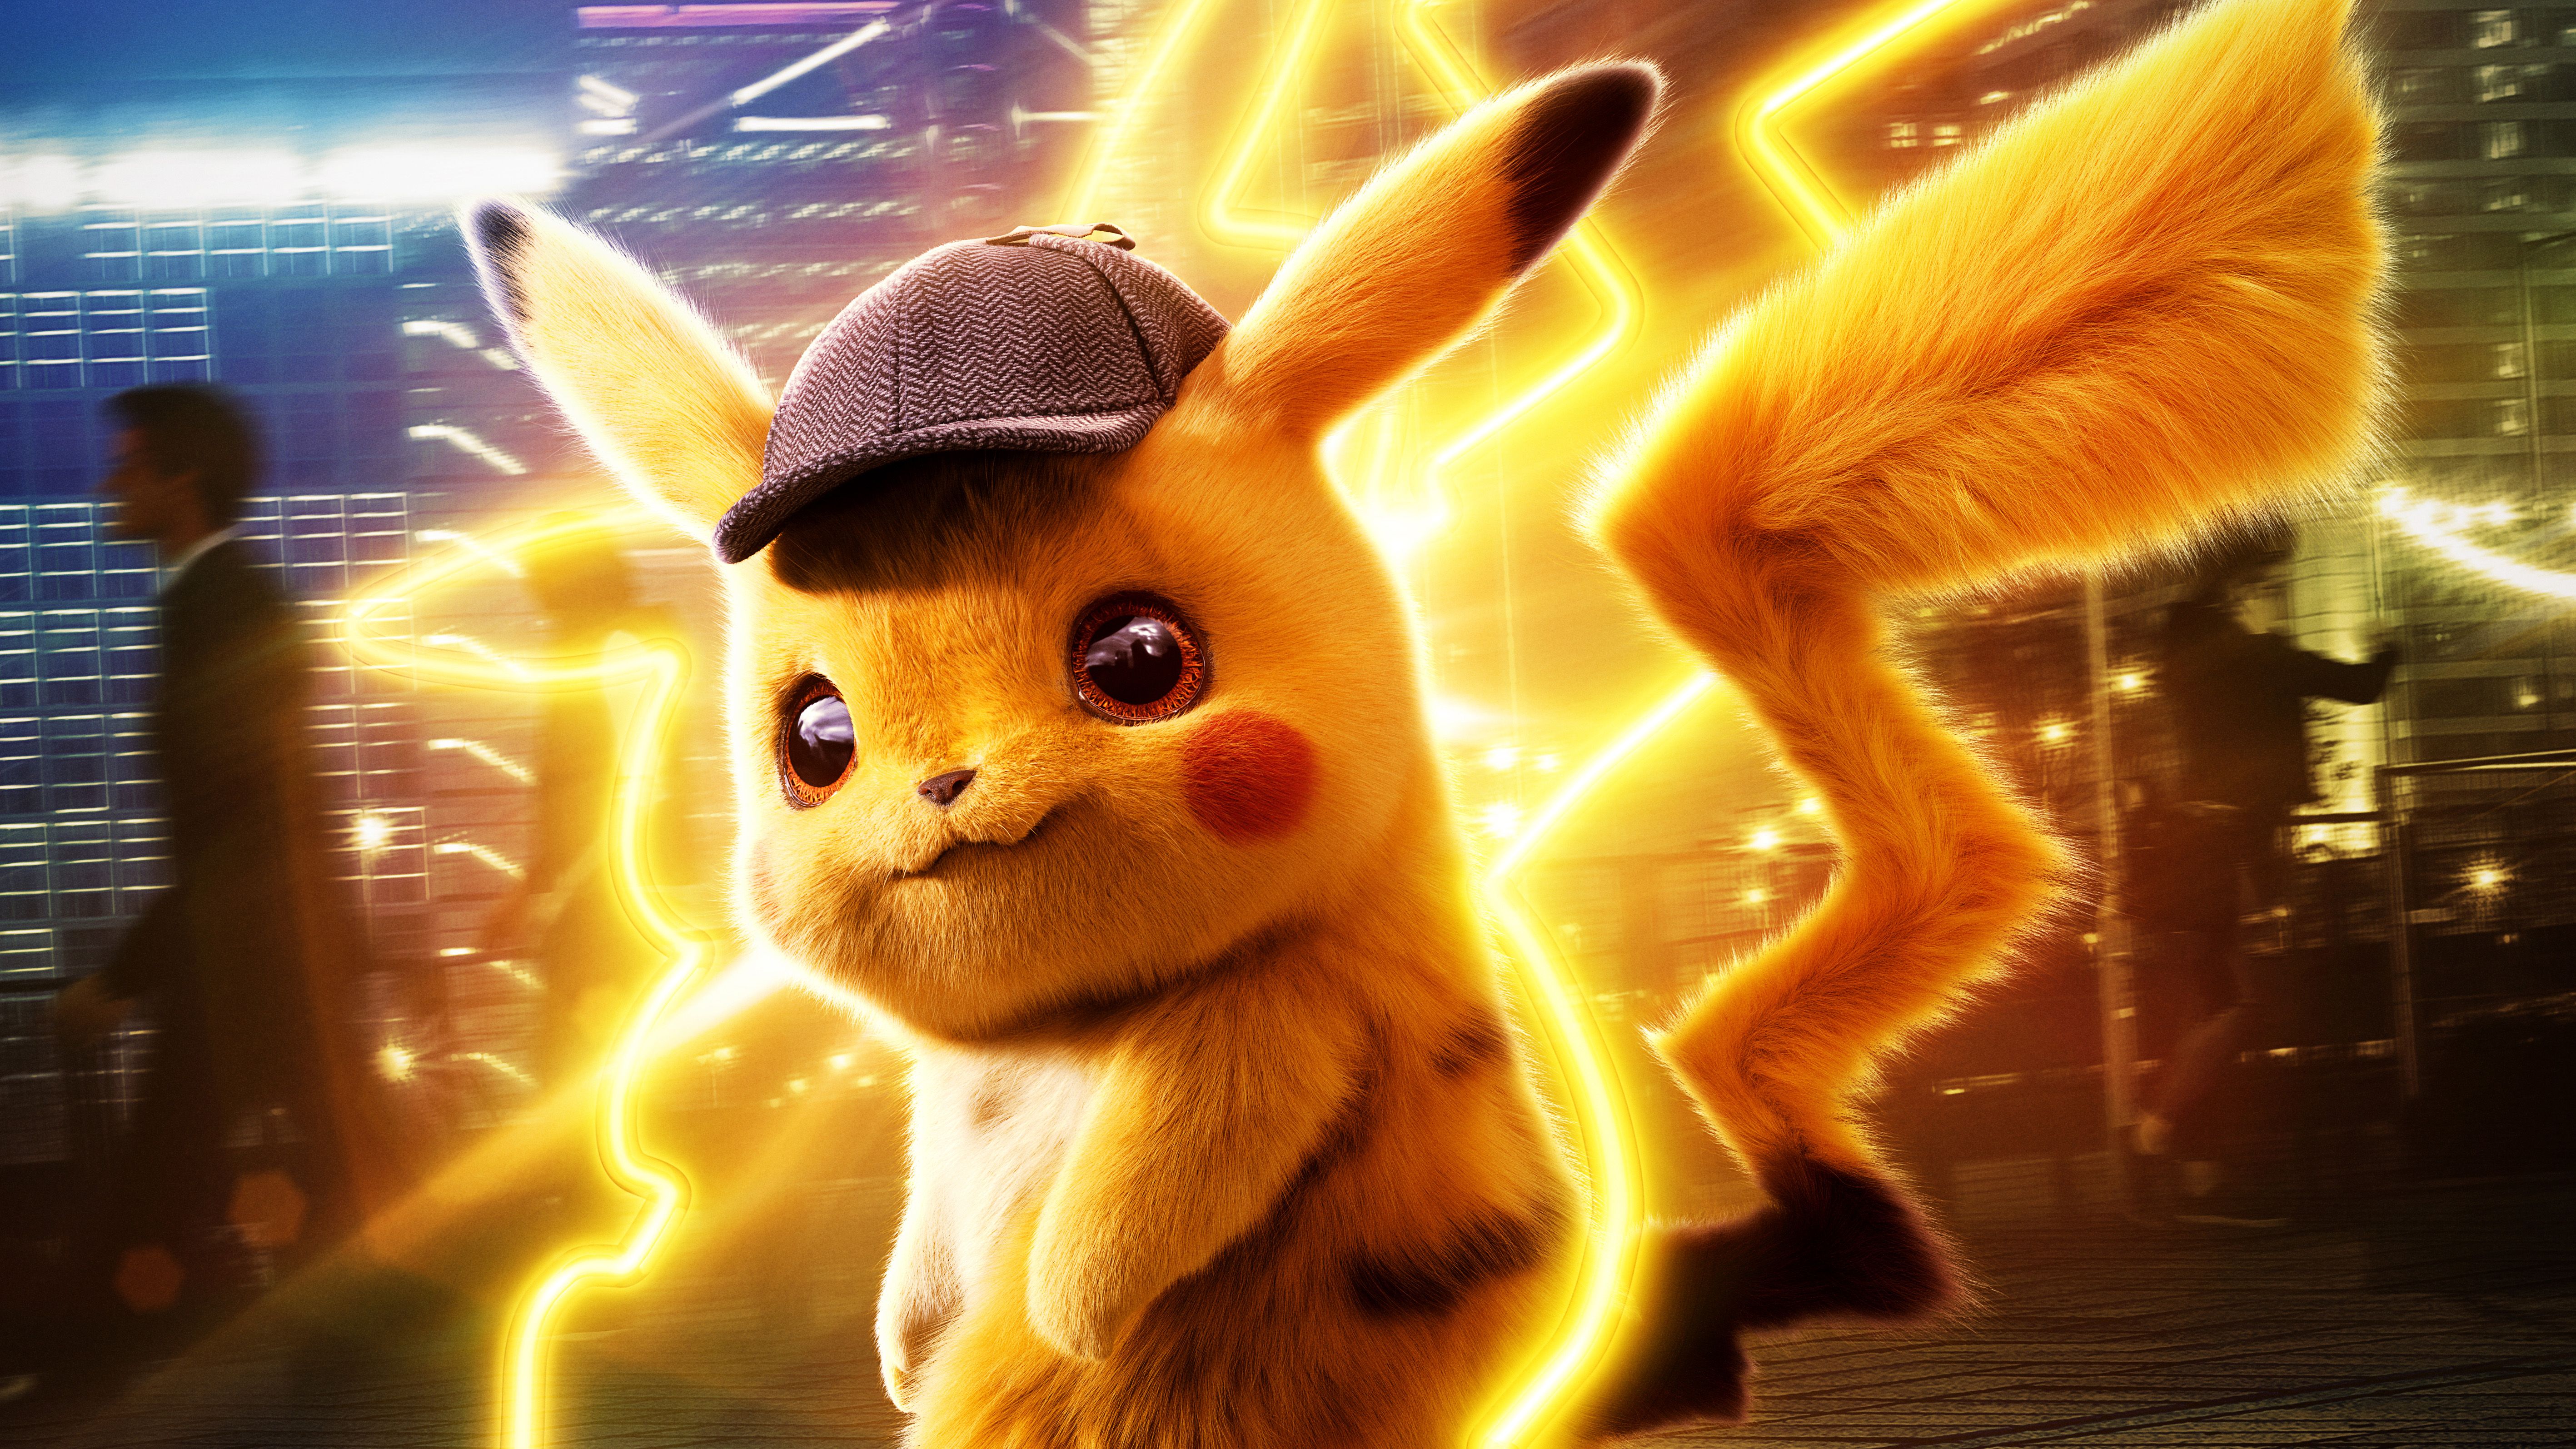 Detective Pikachu HD Wallpapers Free Download 